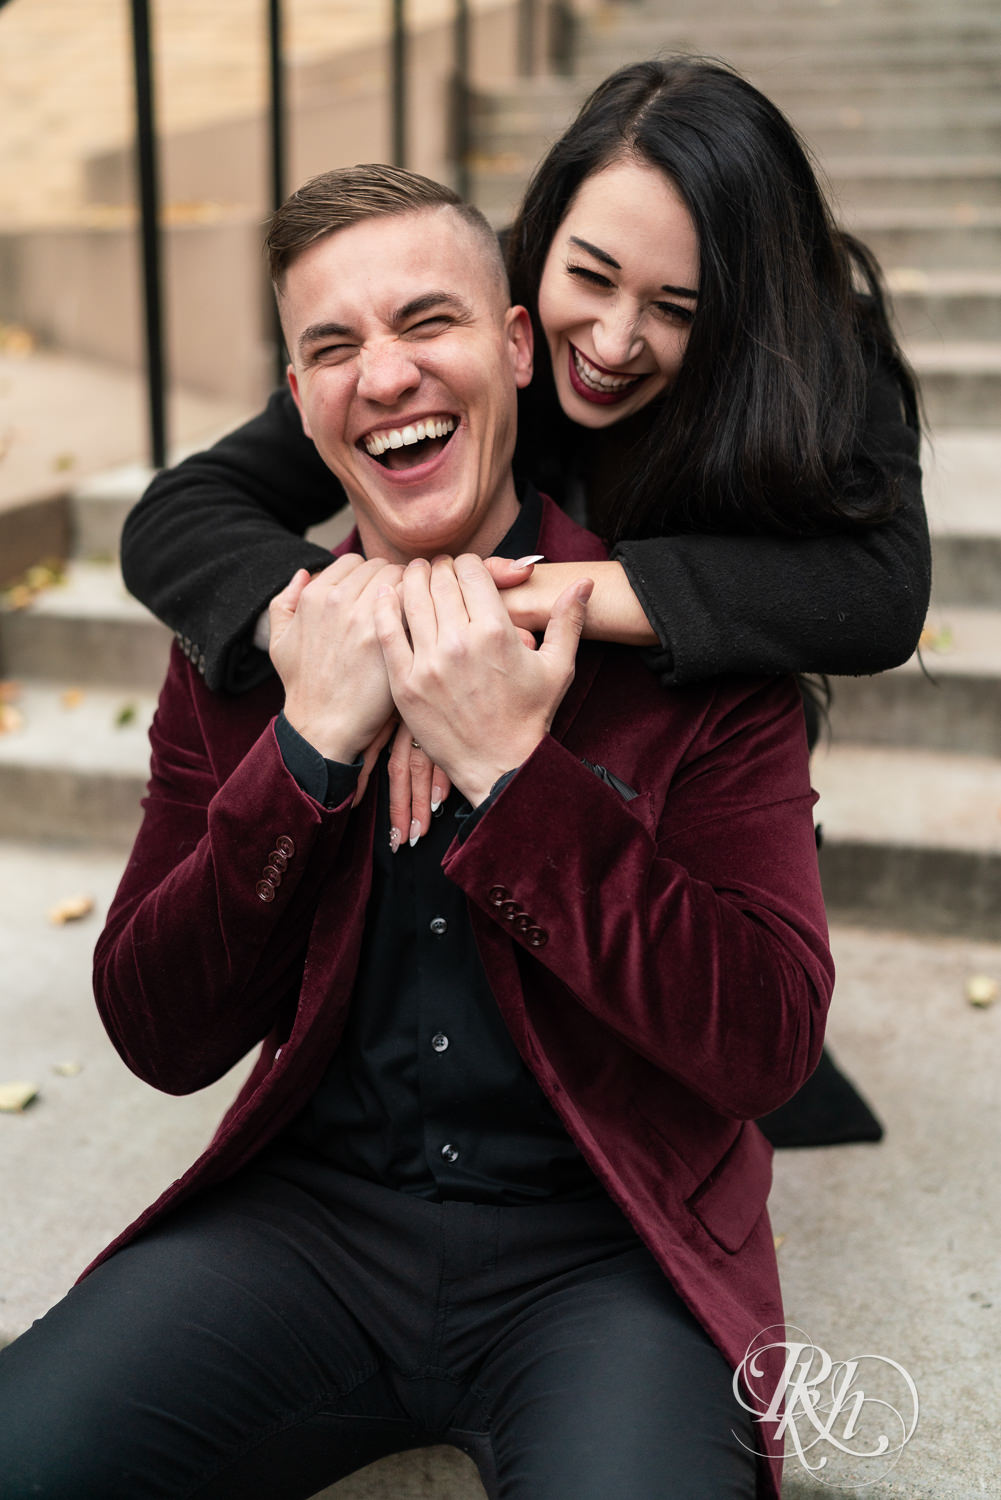 Man in black clothes and burgundy jacket and woman in black dress laugh on steps in Minneapolis, Minnesota.